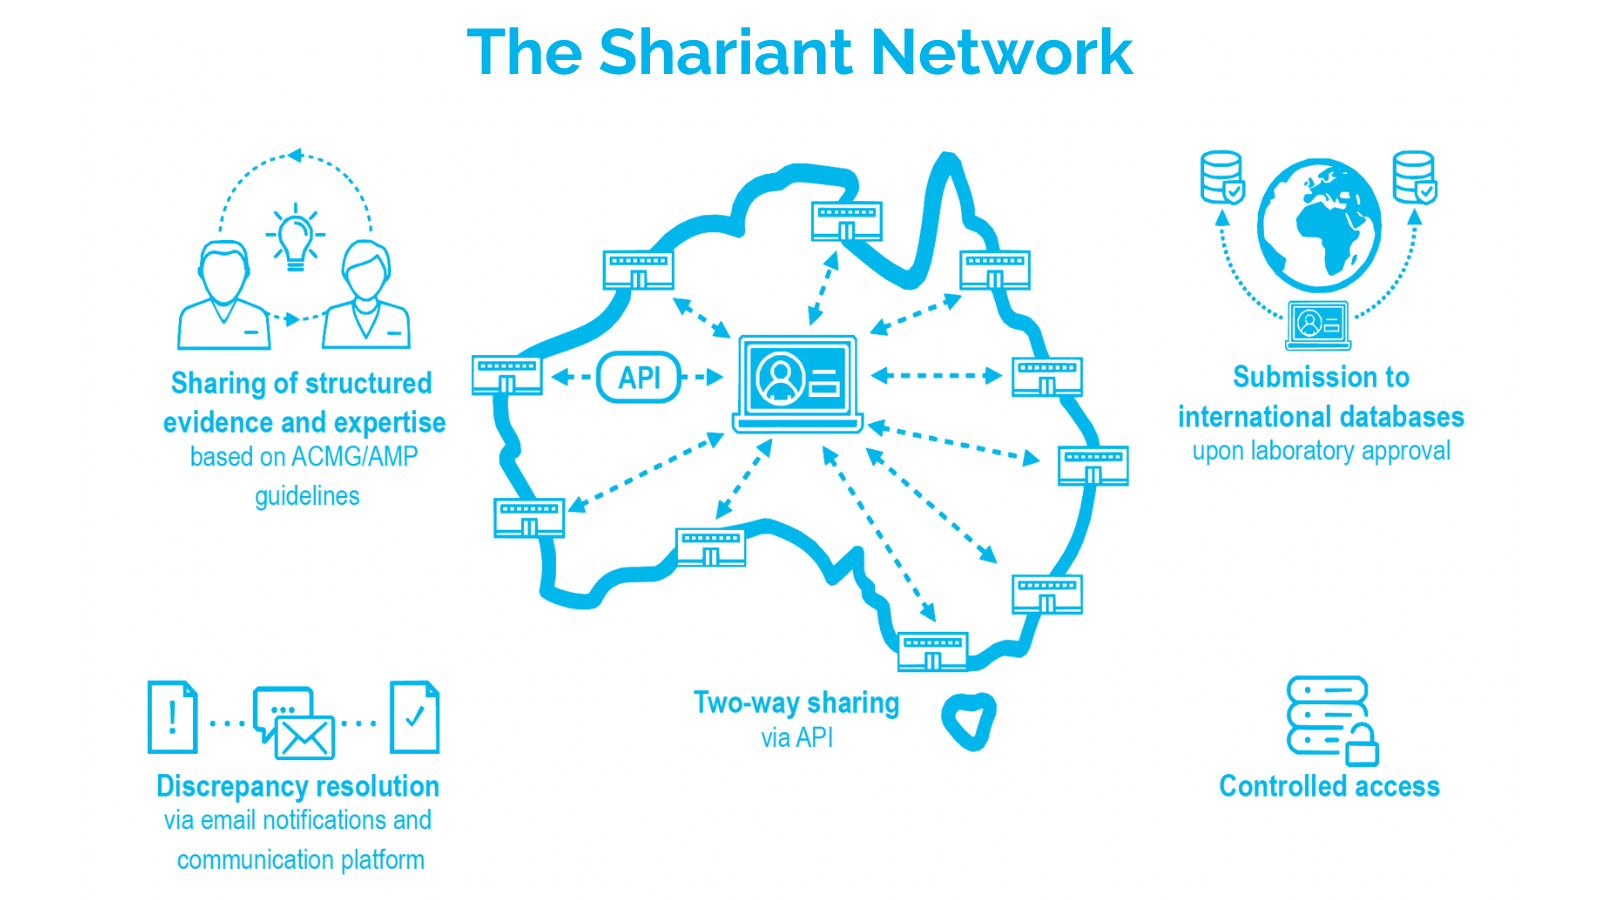 The Shariant Network